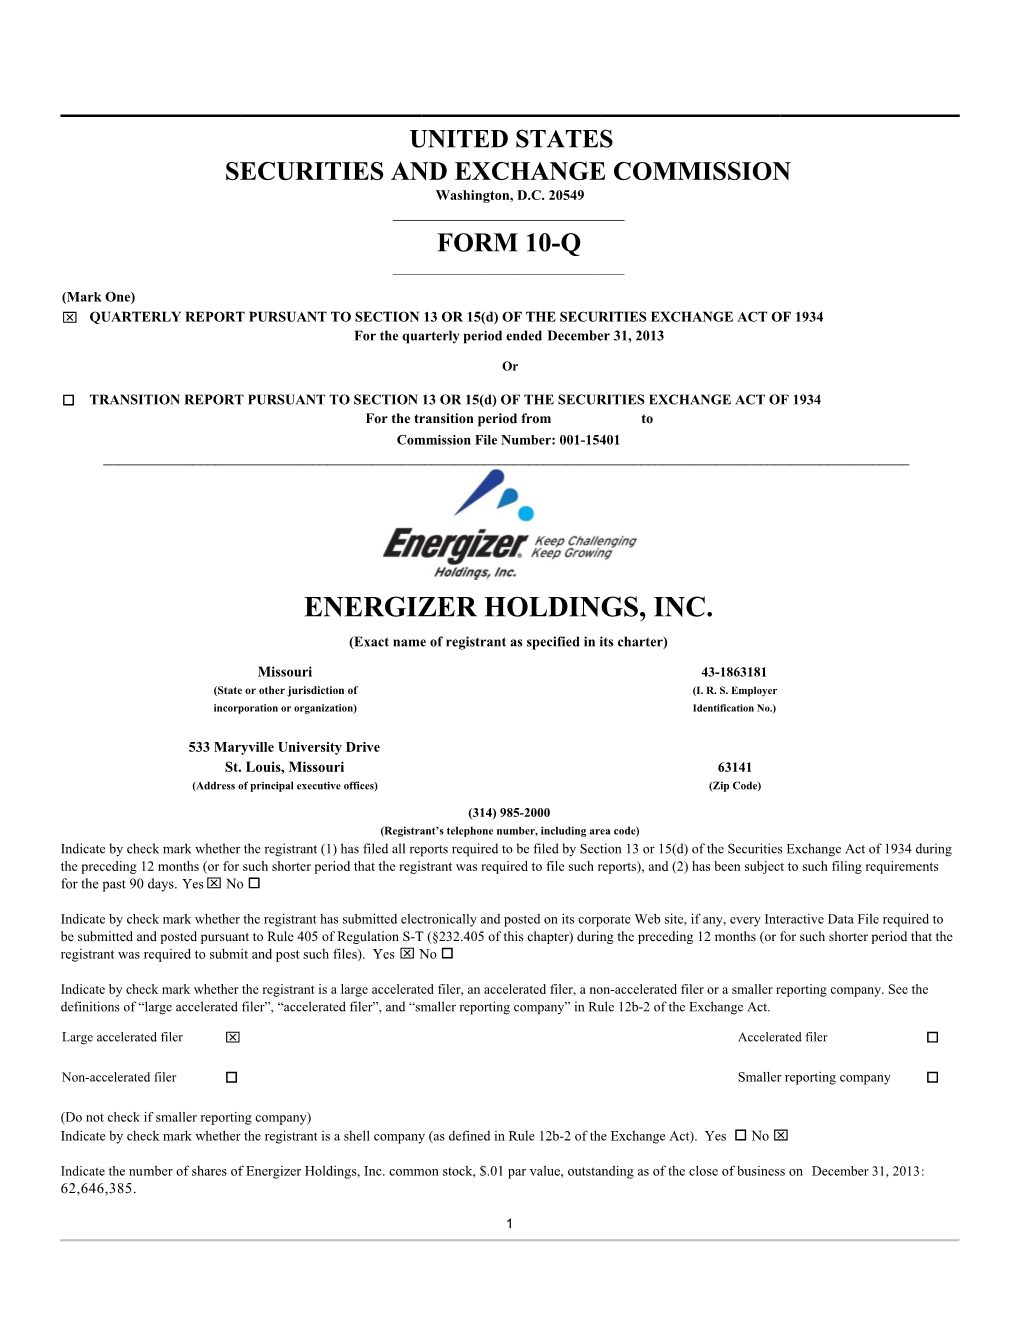 ENERGIZER HOLDINGS, INC. (Exact Name of Registrant As Specified in Its Charter)